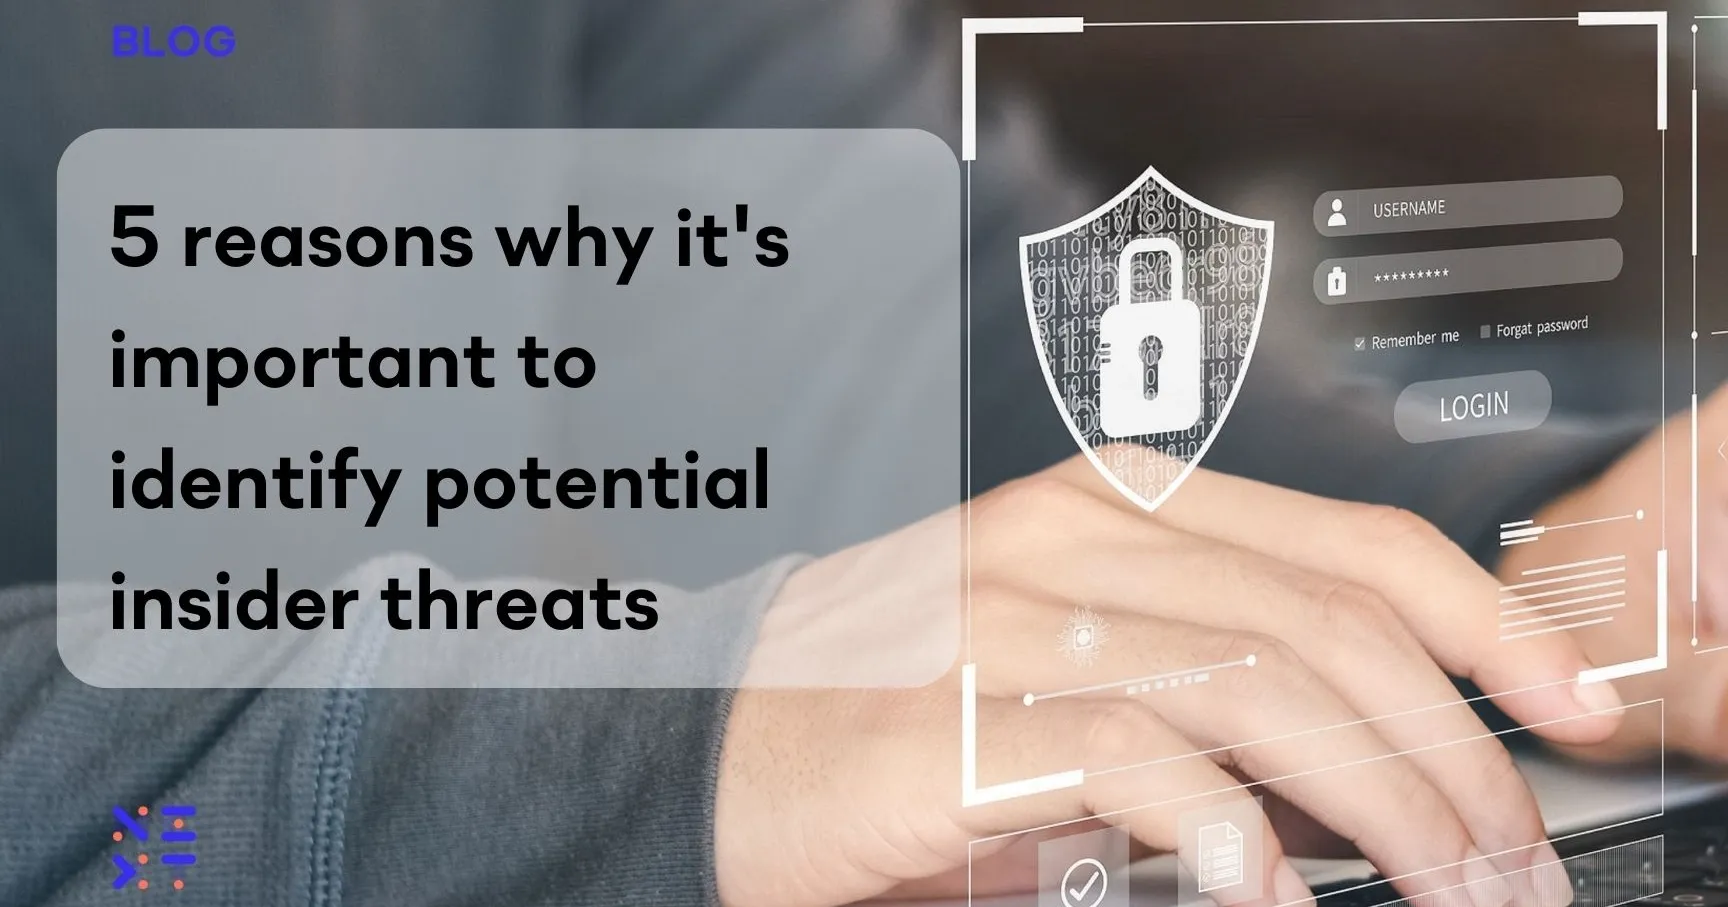 5 reasons why it's important to identify potential insider threats